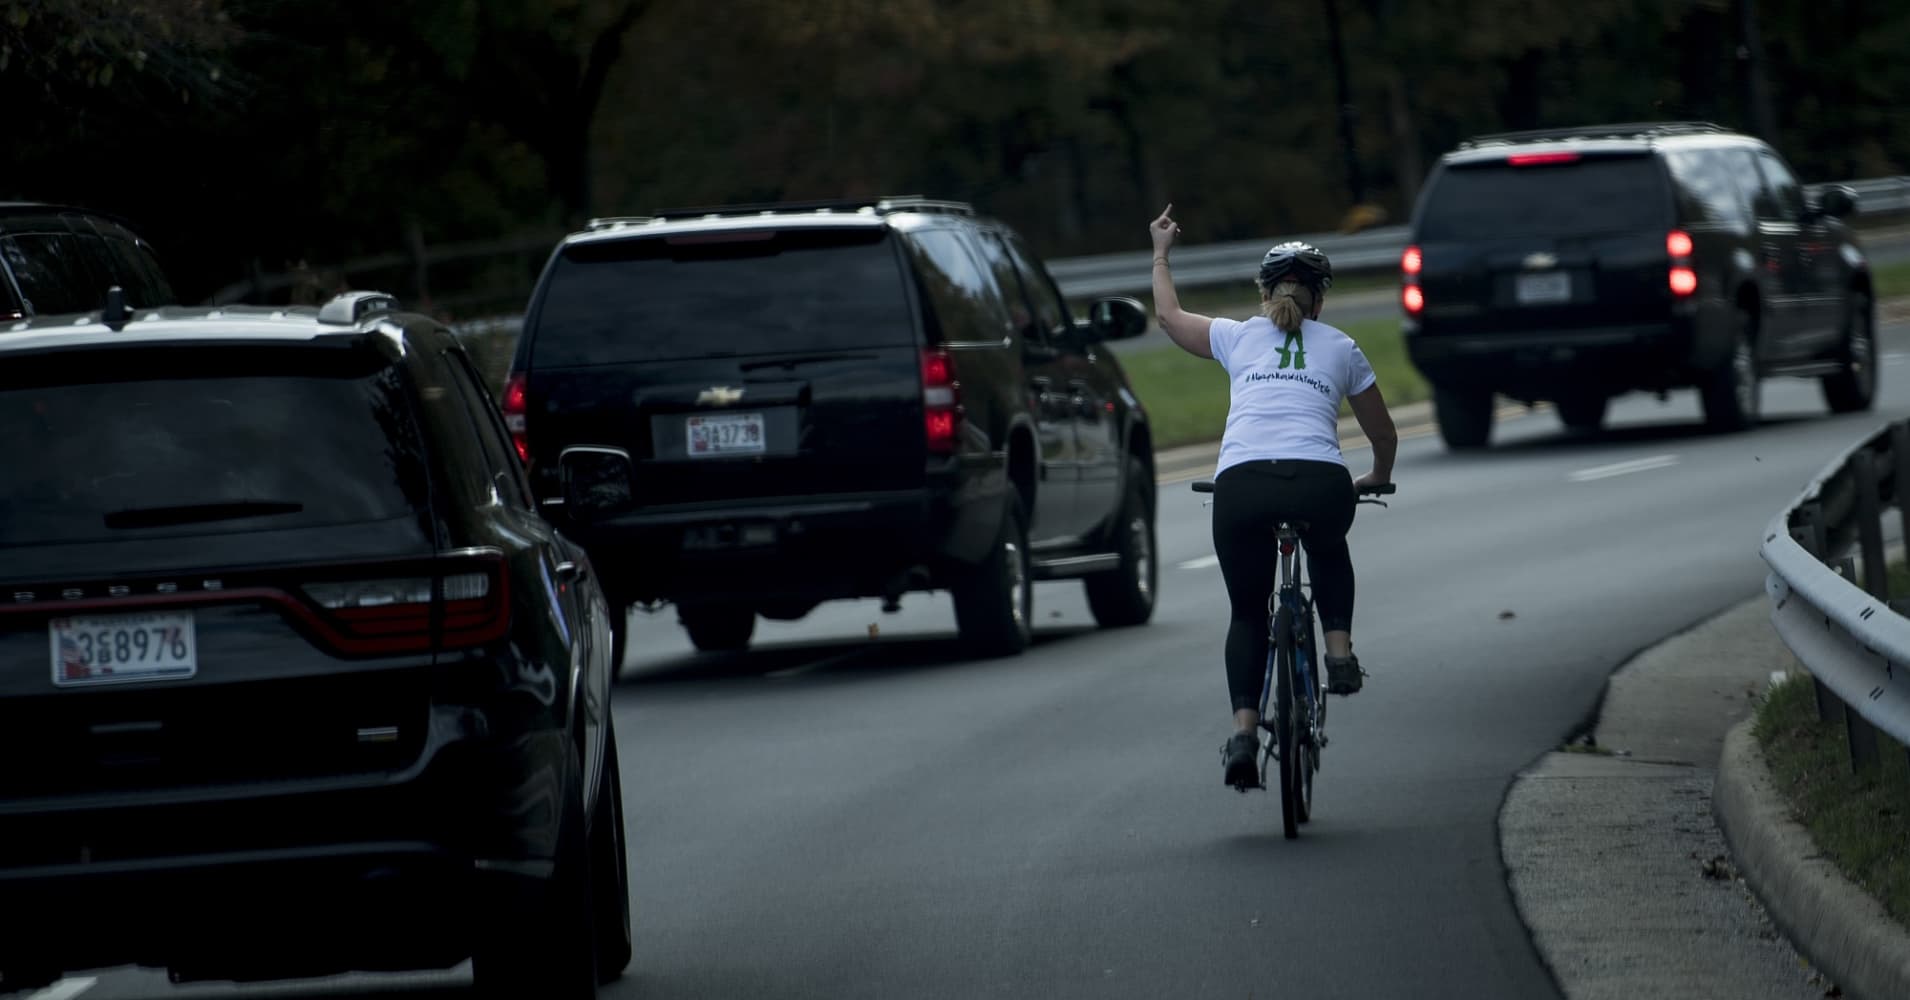 A woman on a bike gestures with her middle finger as a motorcade with US President Donald Trump departs Trump National Golf Course October 28, 2017 in Sterling, Virginia.